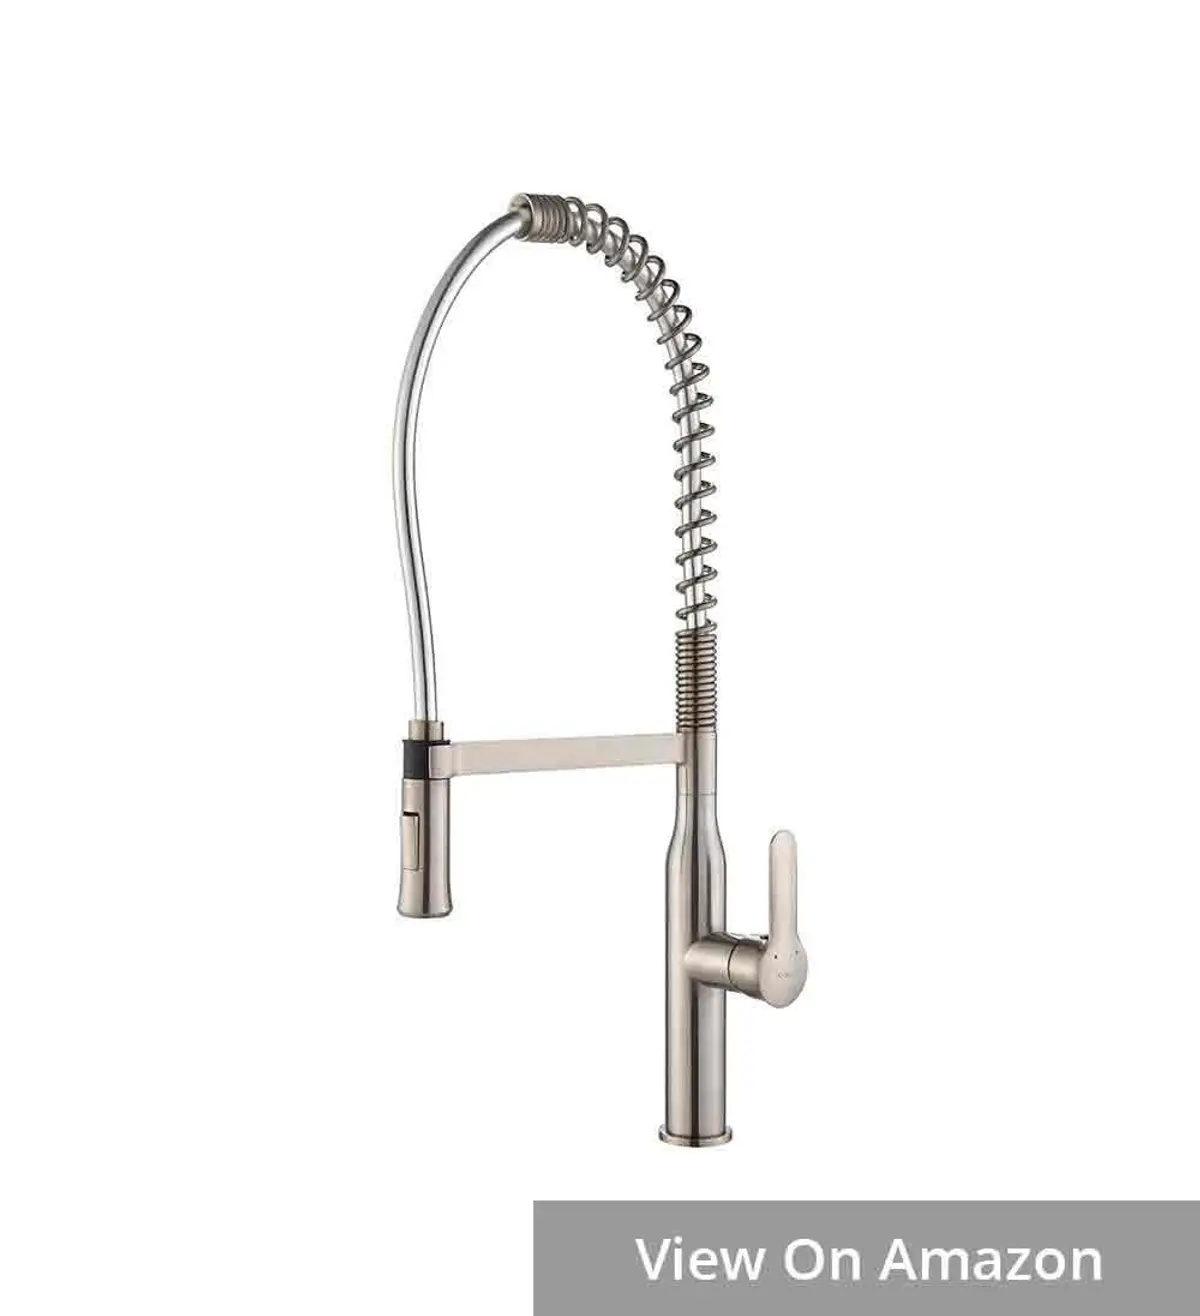 Best-Kraus-KPF-1650-pull-out-kitchen-faucet